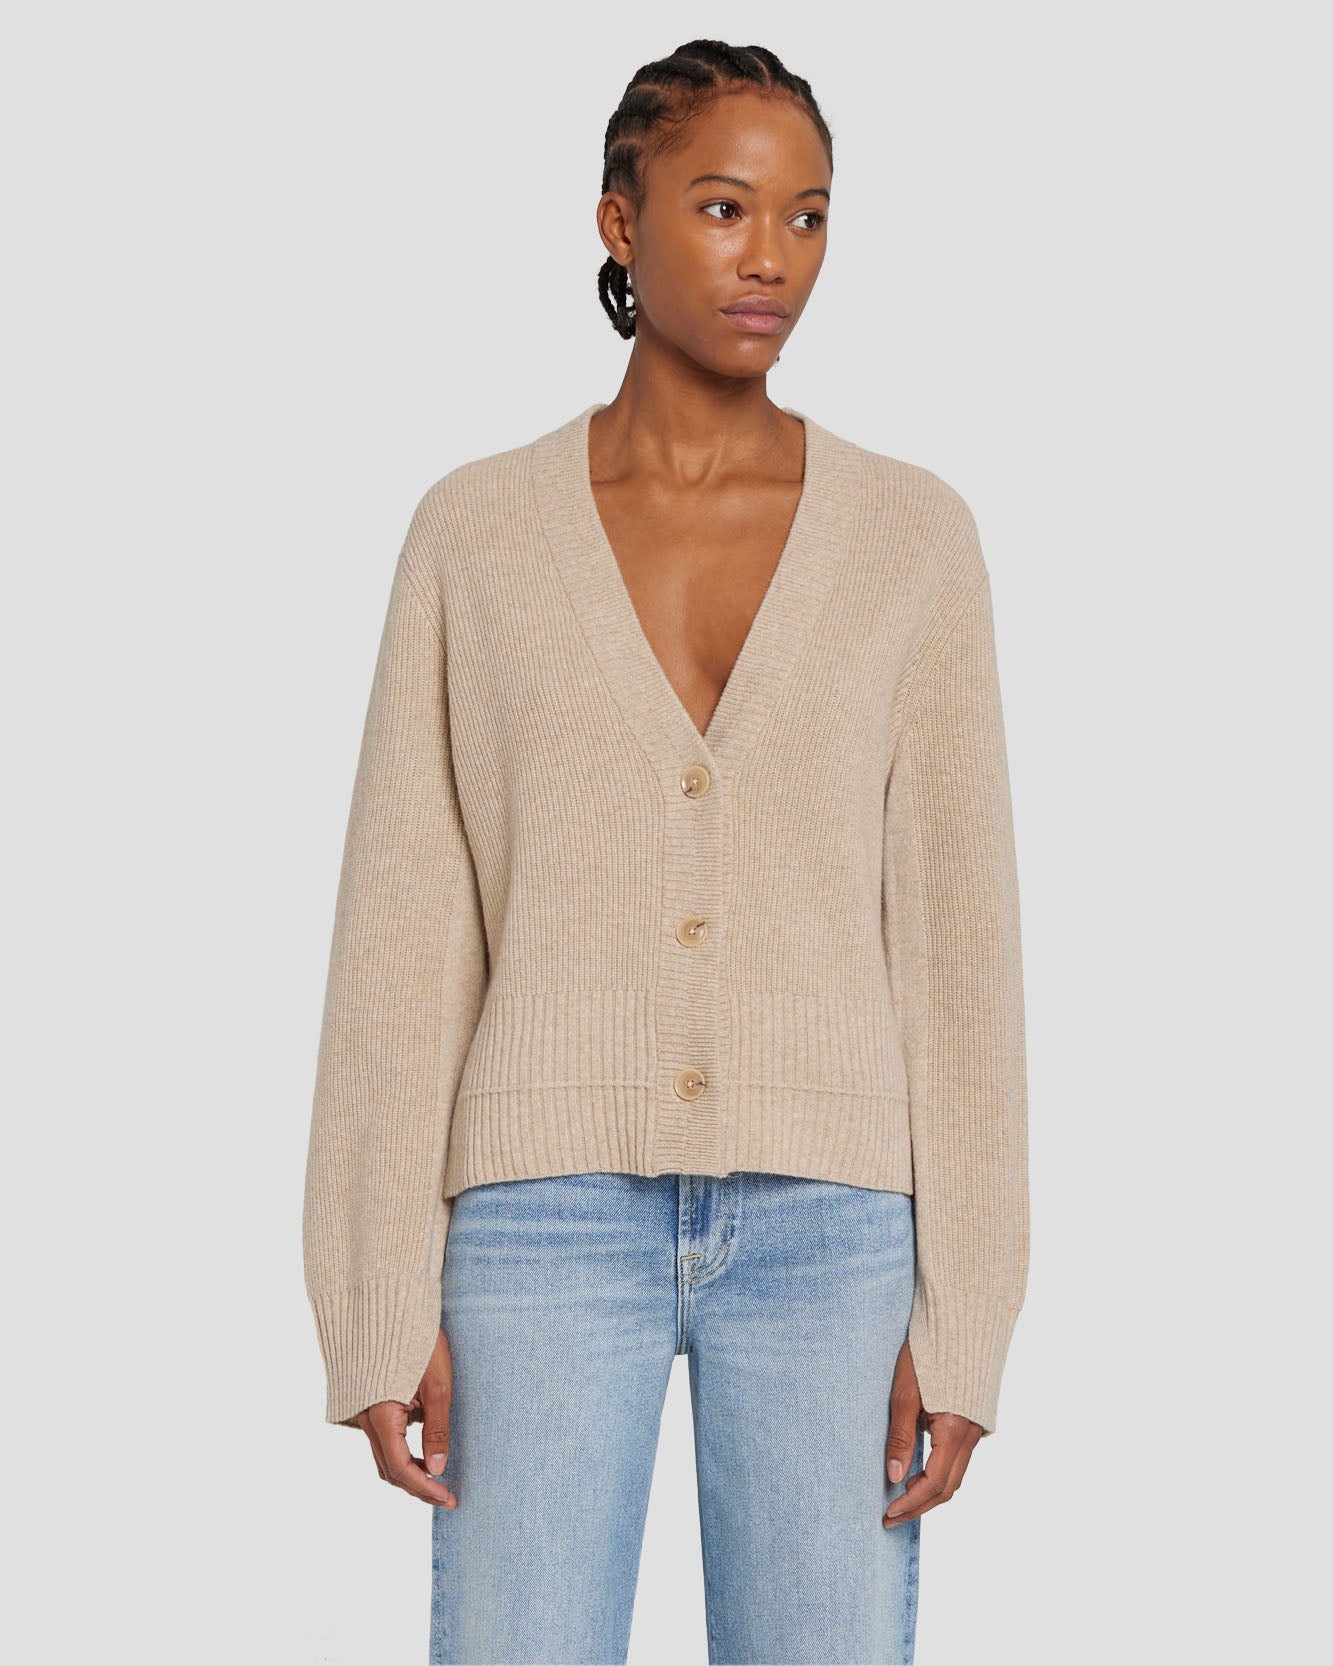 Cashmere Cardigan in Oatmeal | 7 For All Mankind